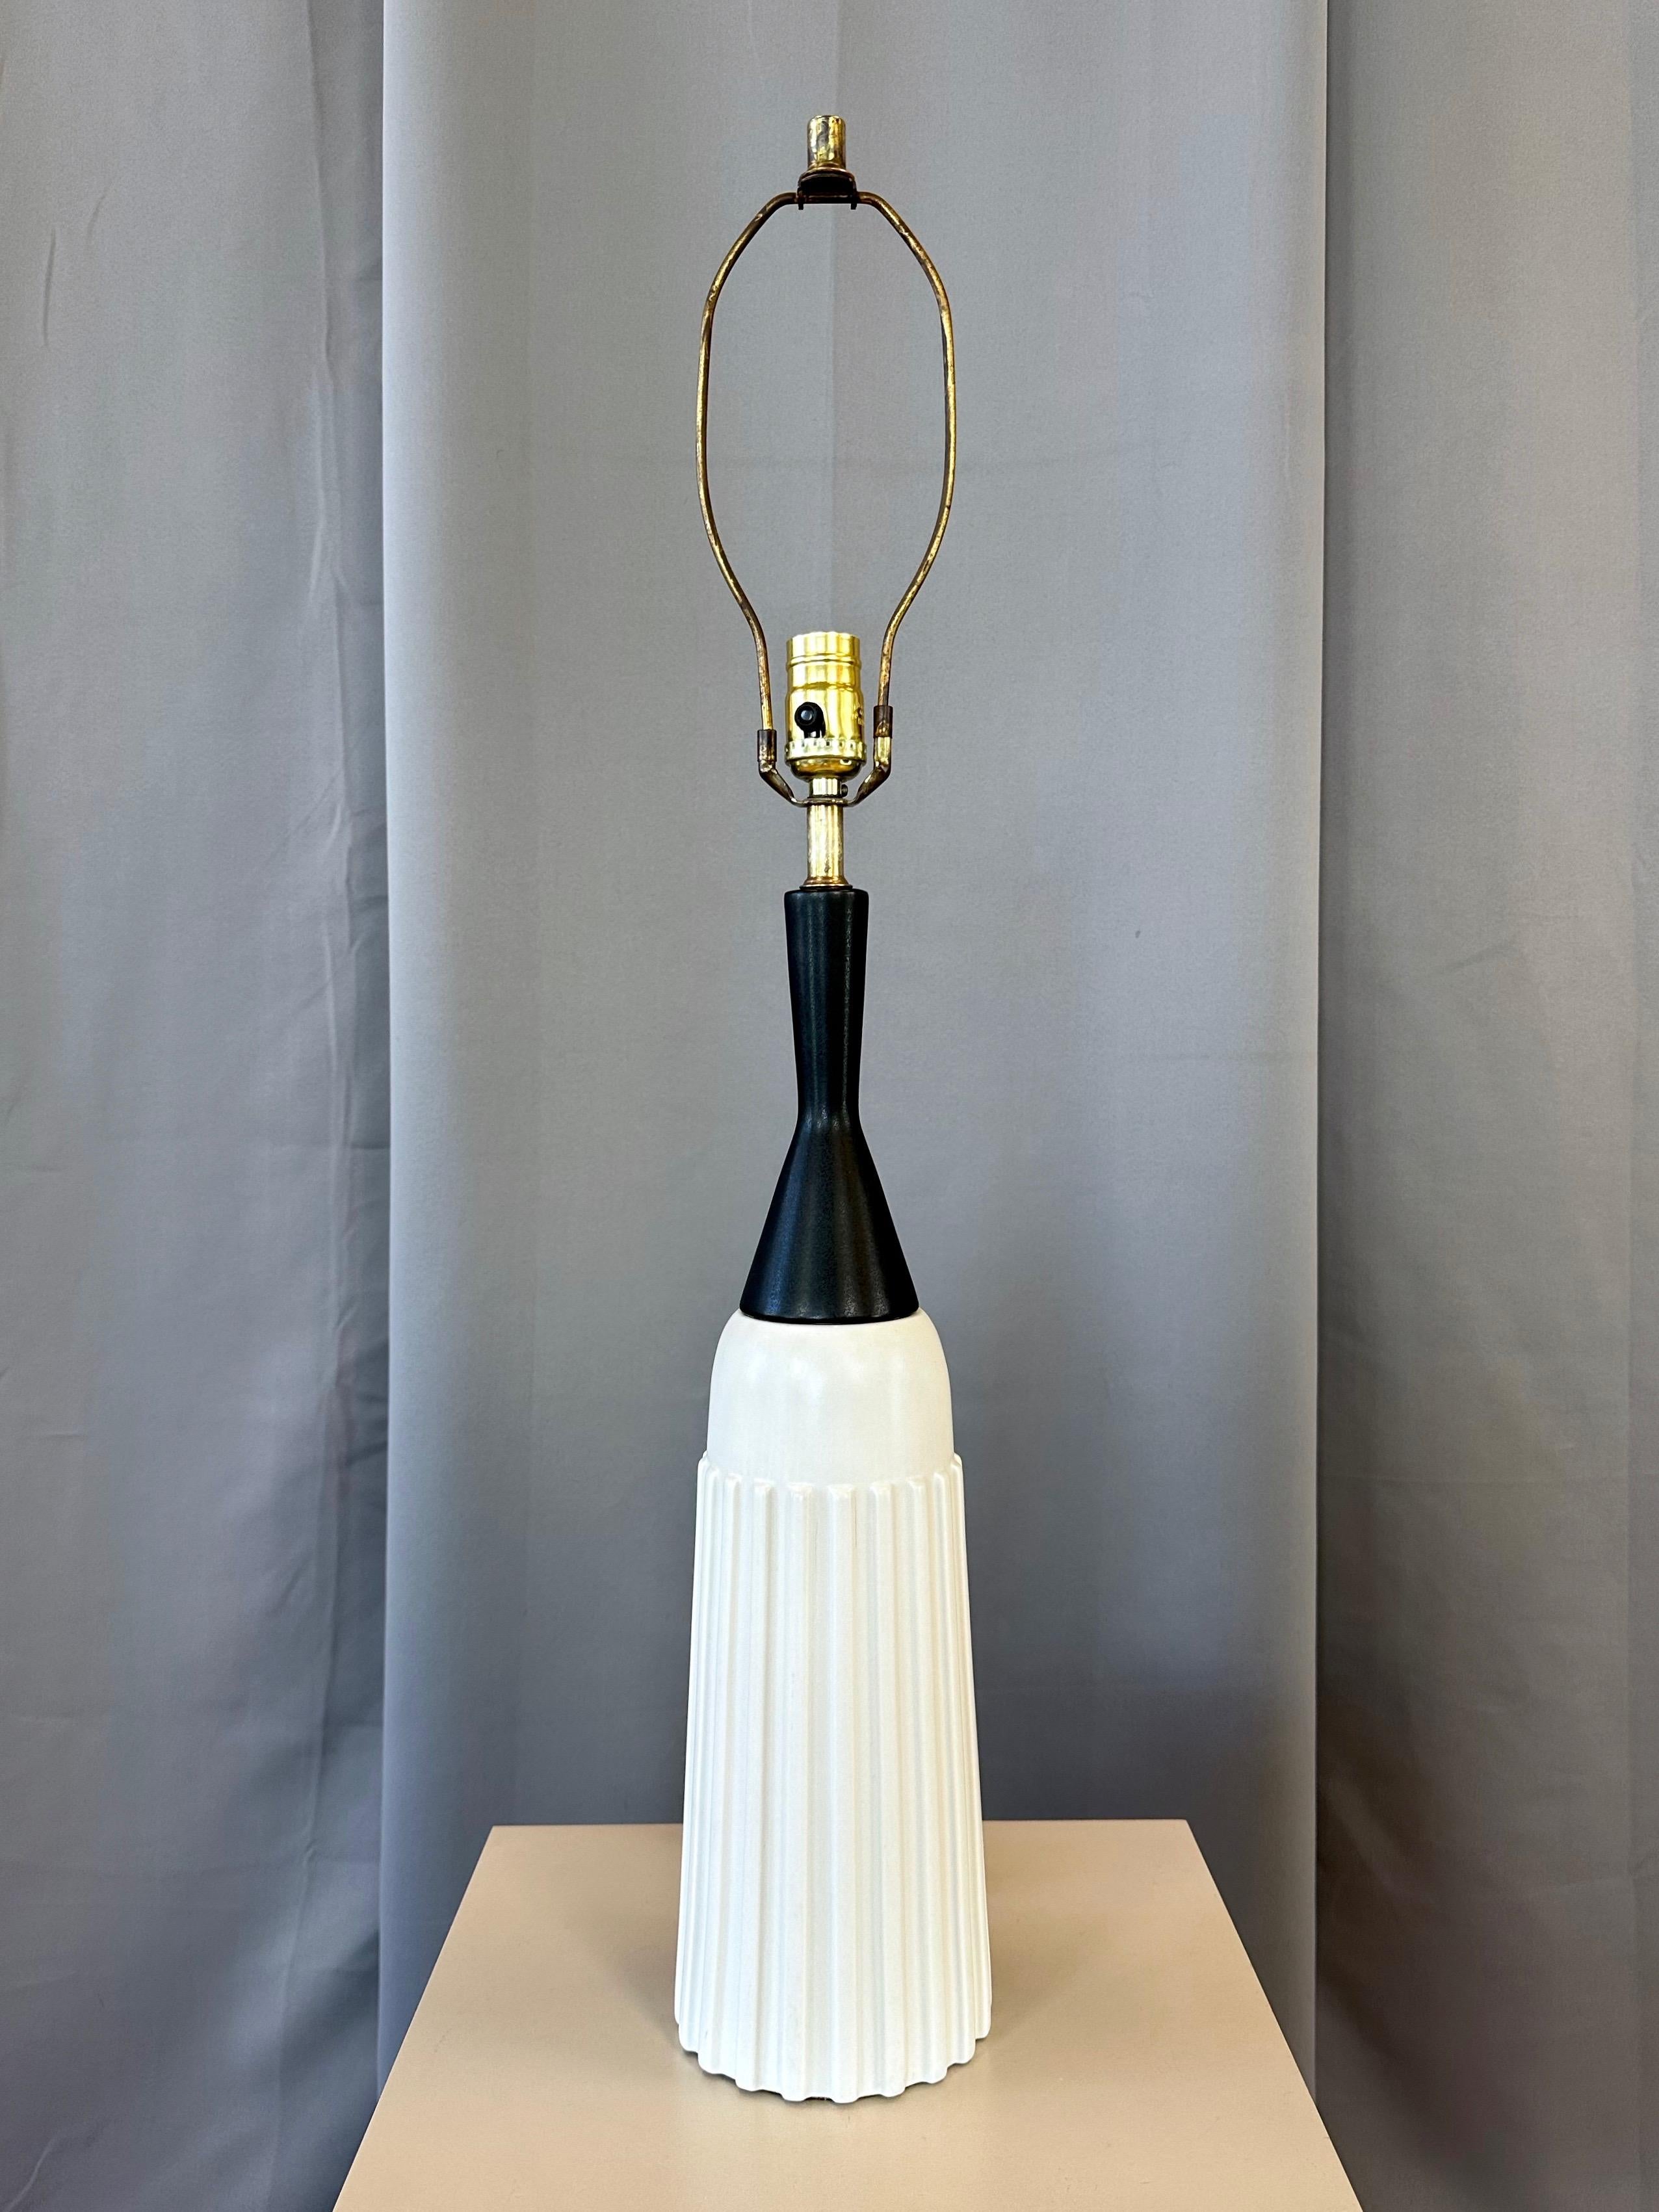 A very dapper and uncommon 1950s bottle-shaped ceramic table lamp with white ribbed body and black tapered neck.

Handsome lines, perfect proportions, and a Truman Capote-approved black and white color scheme call to mind a natty bowtie and tuxedo